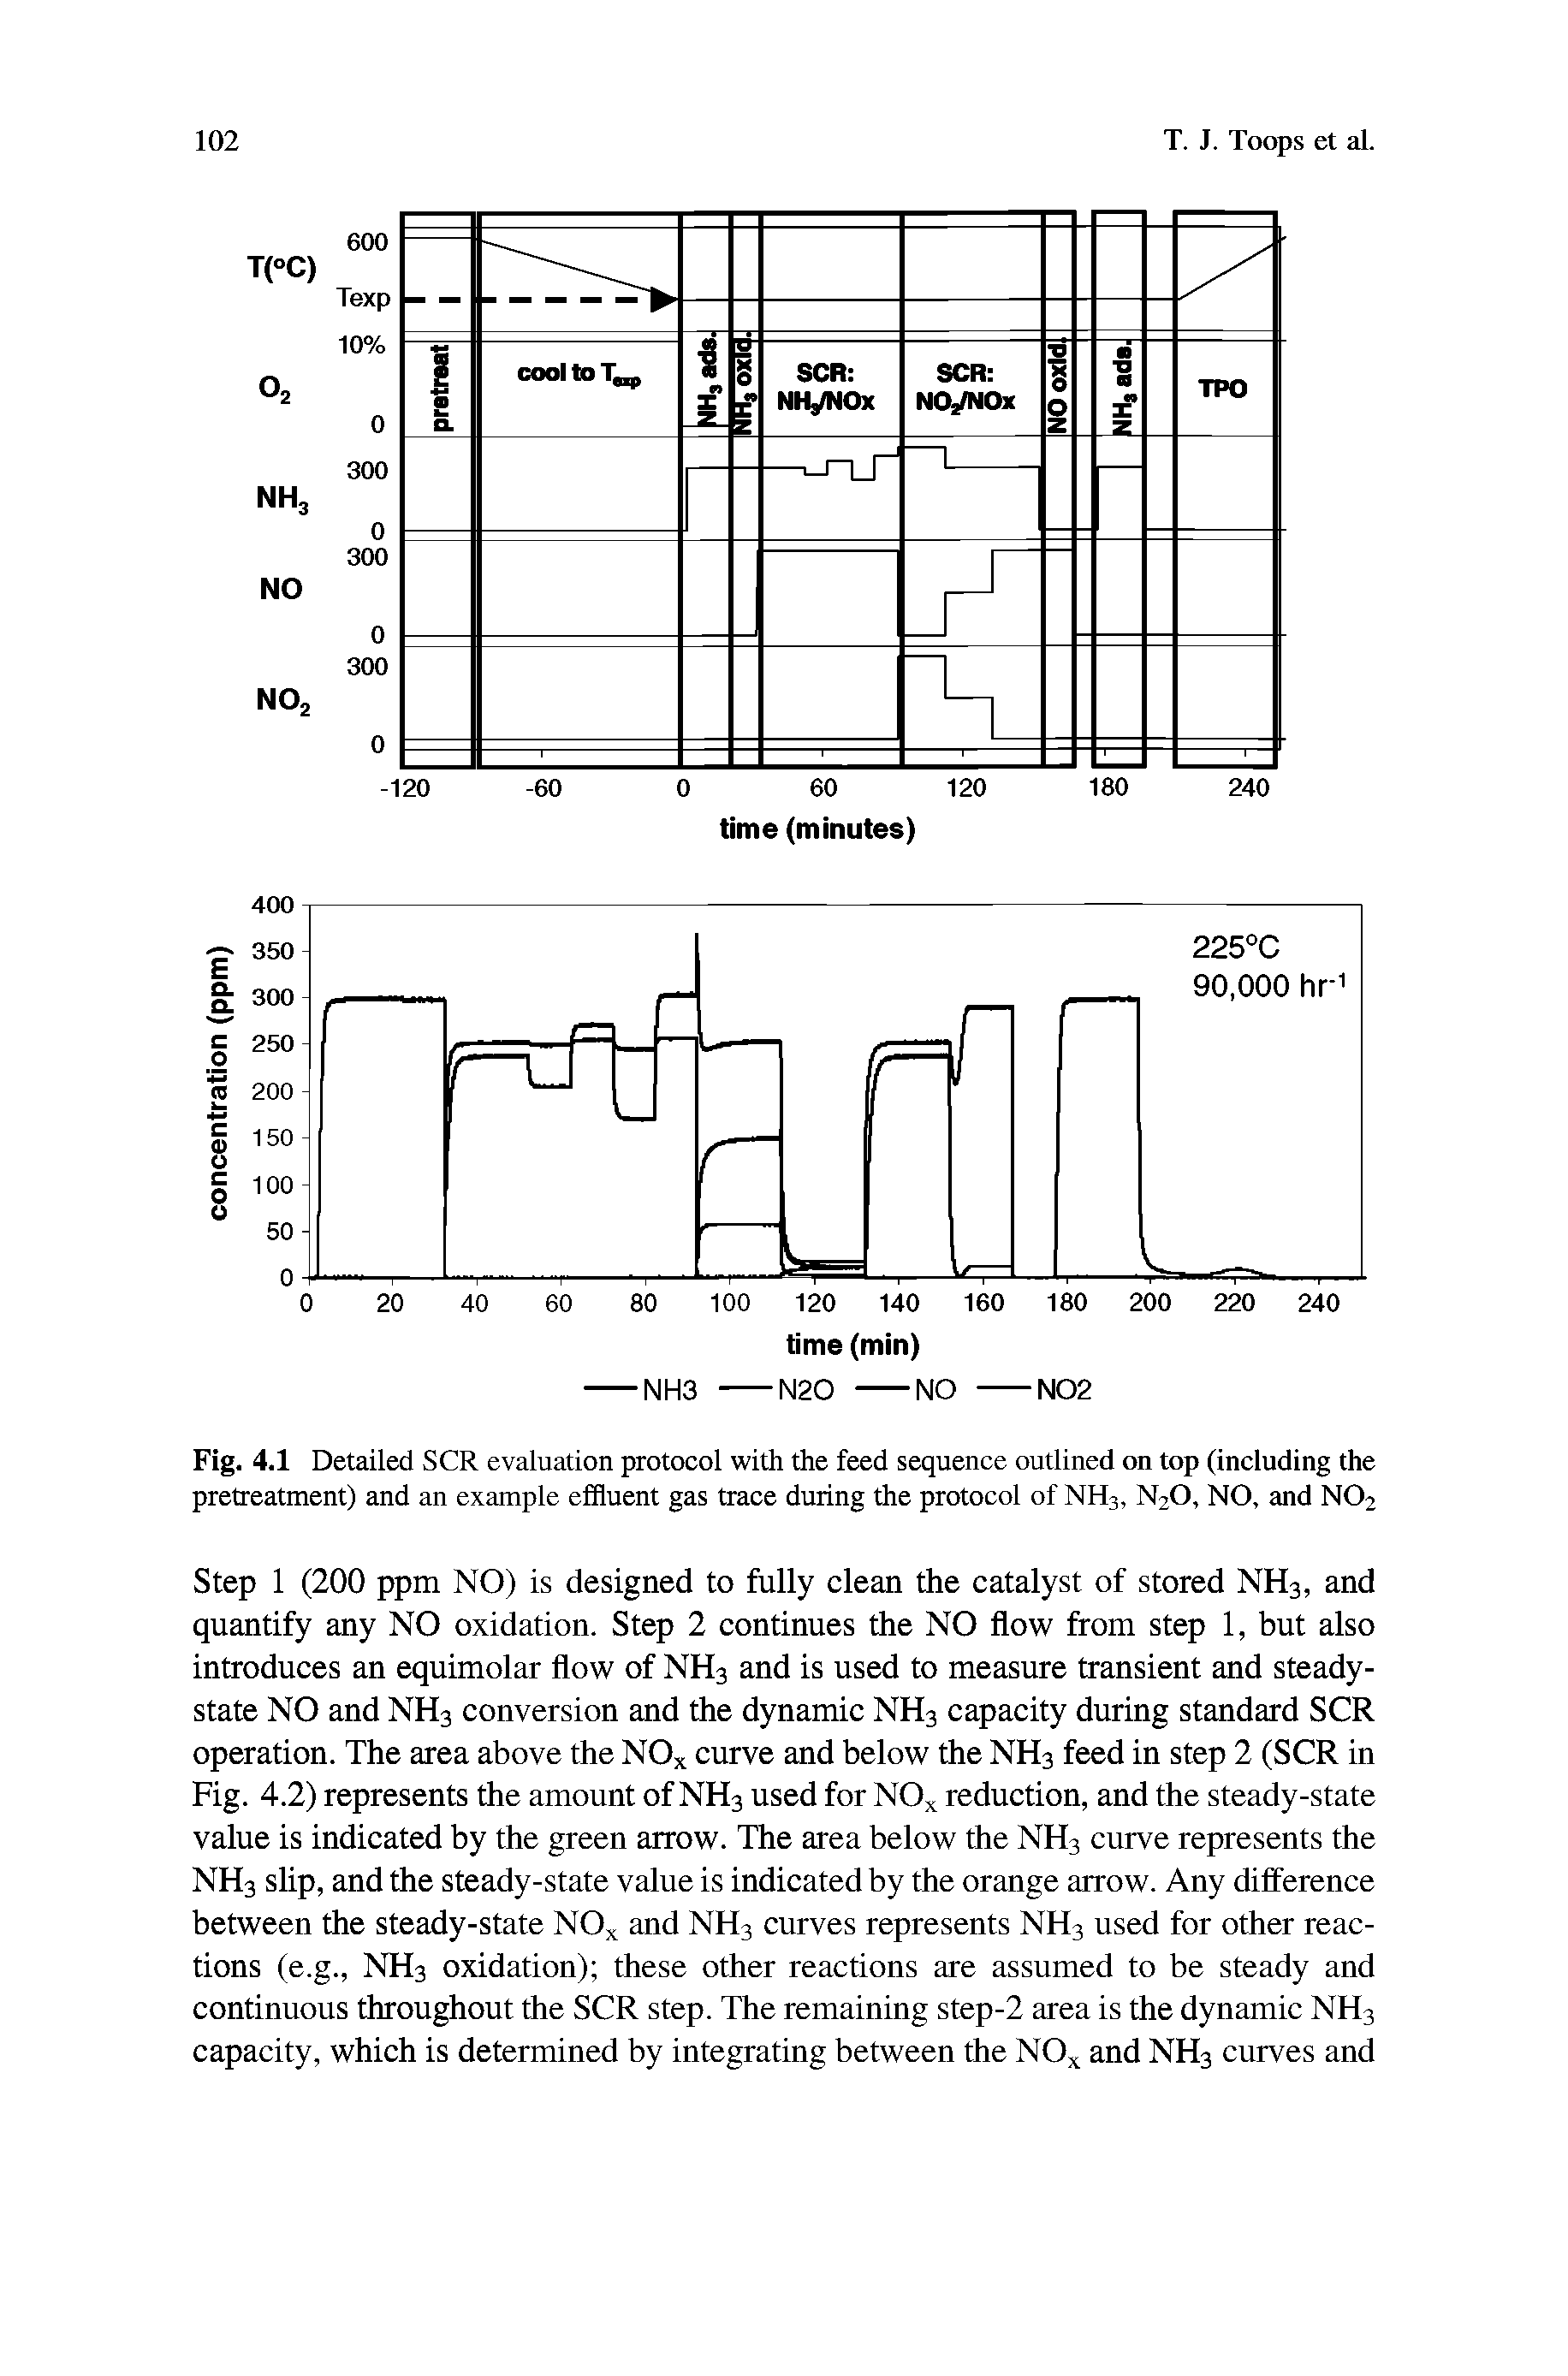 Fig. 4.1 Detailed SCR evaluation protocol with the feed sequence outlined on top (including the pretreatment) and an example effluent gas trace during the protocol of NH3, N2O, NO, and NO2...